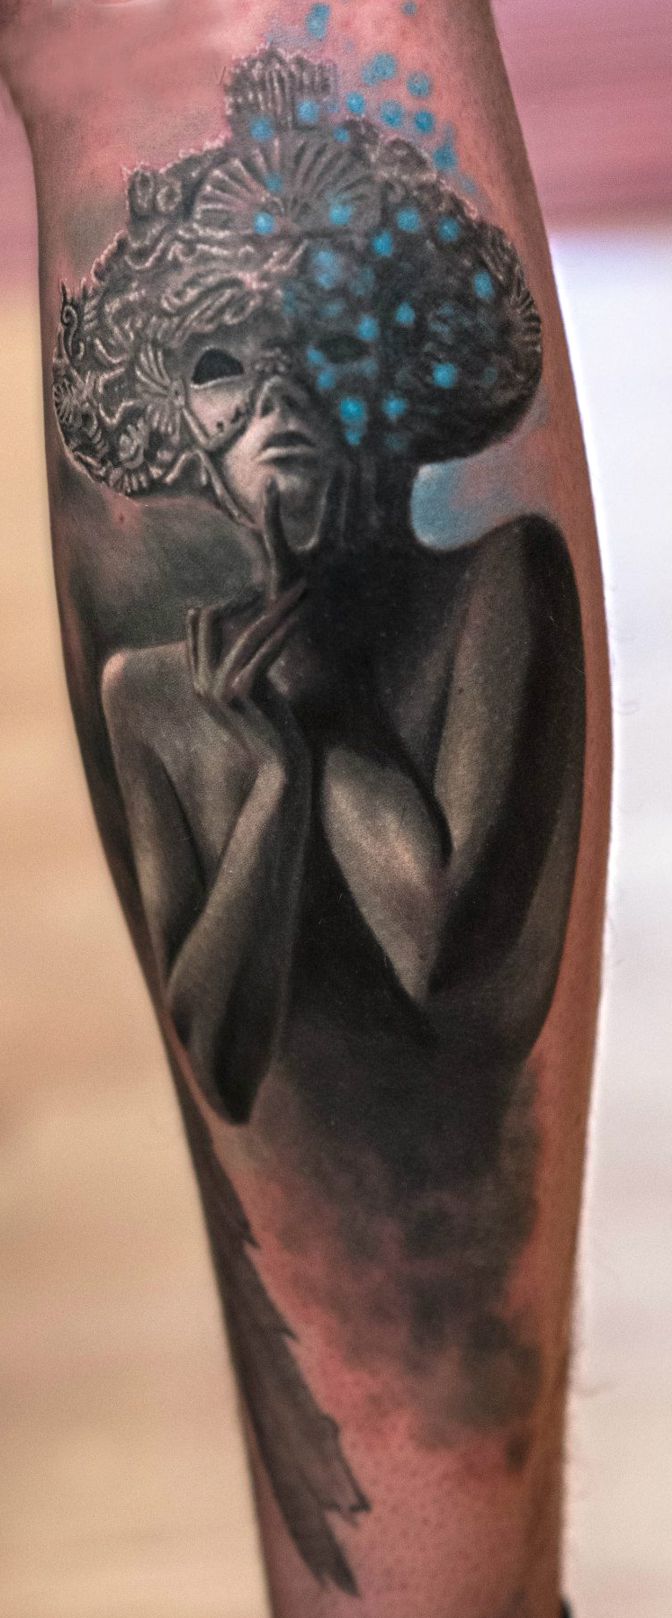 woman in a mask - tattoo